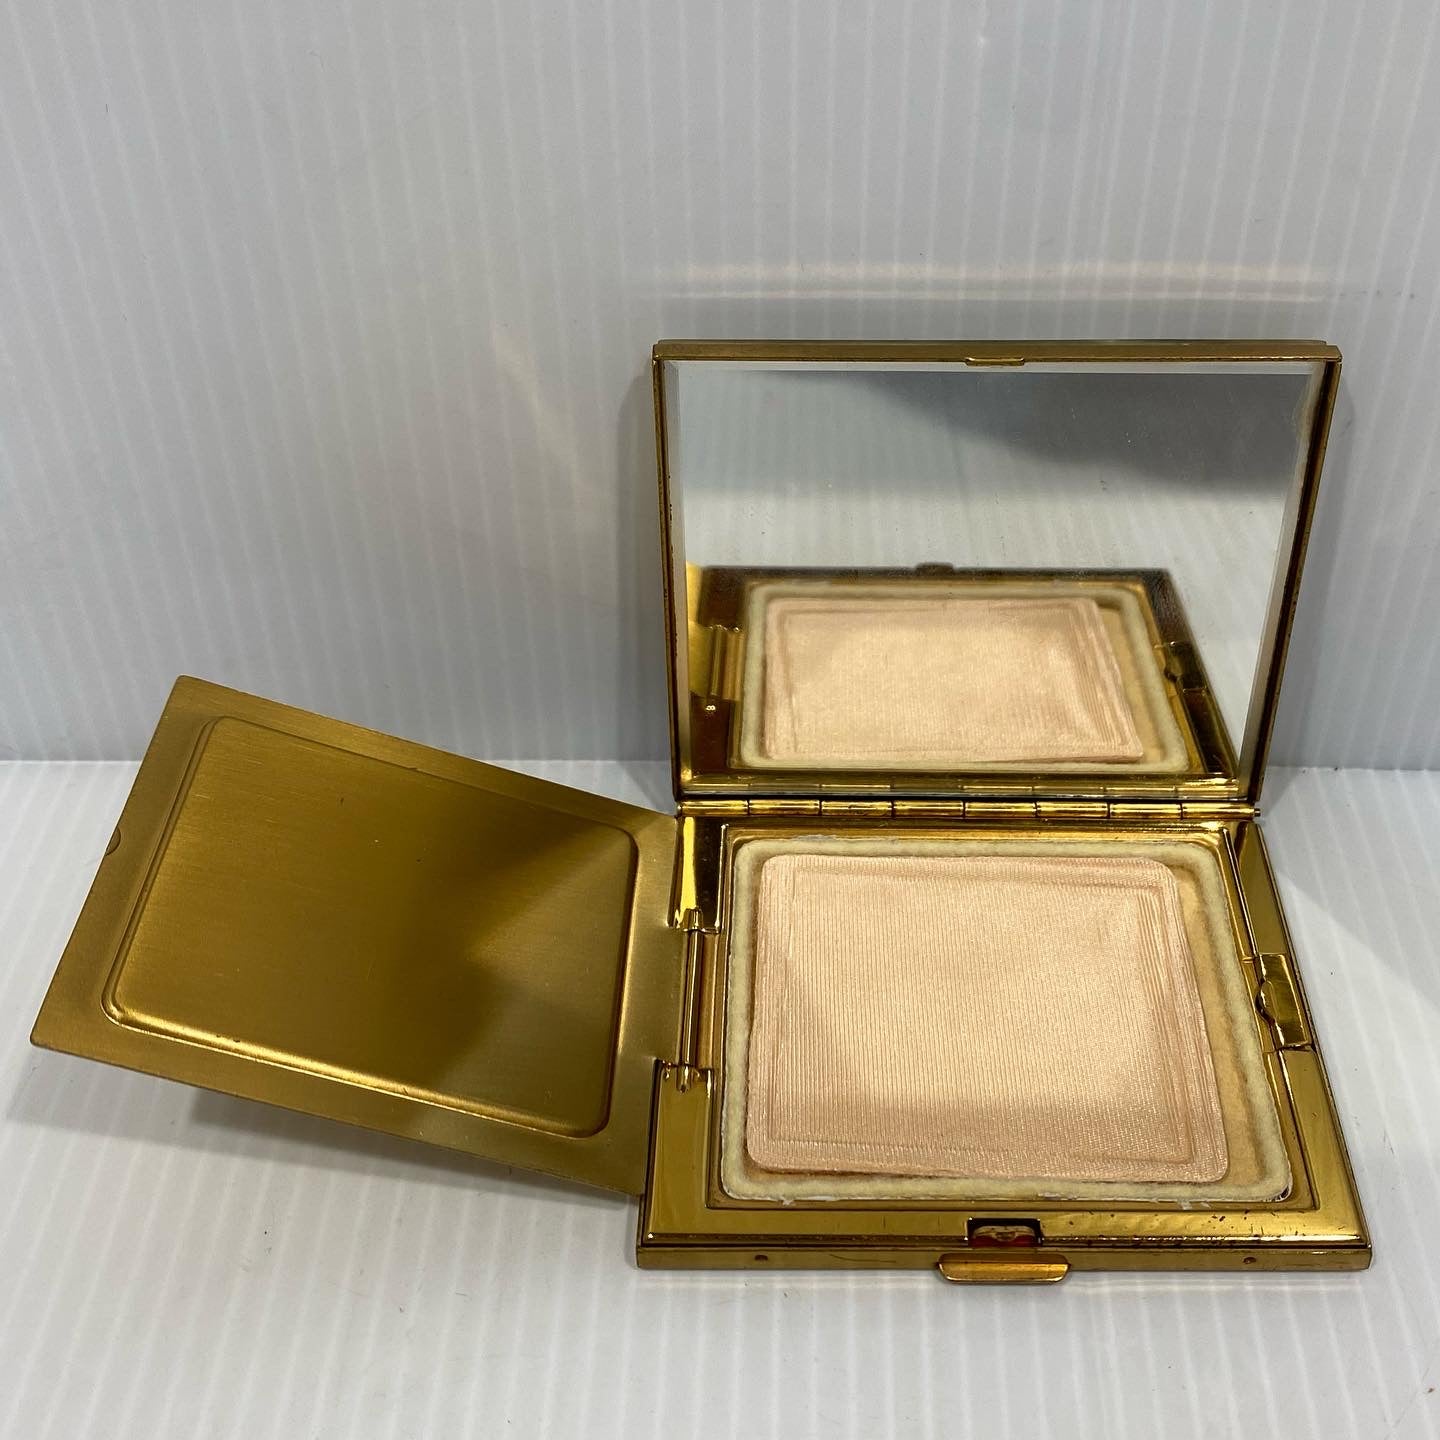 Vintage Mother of Pearl Hand Painted compact Powder. New never used